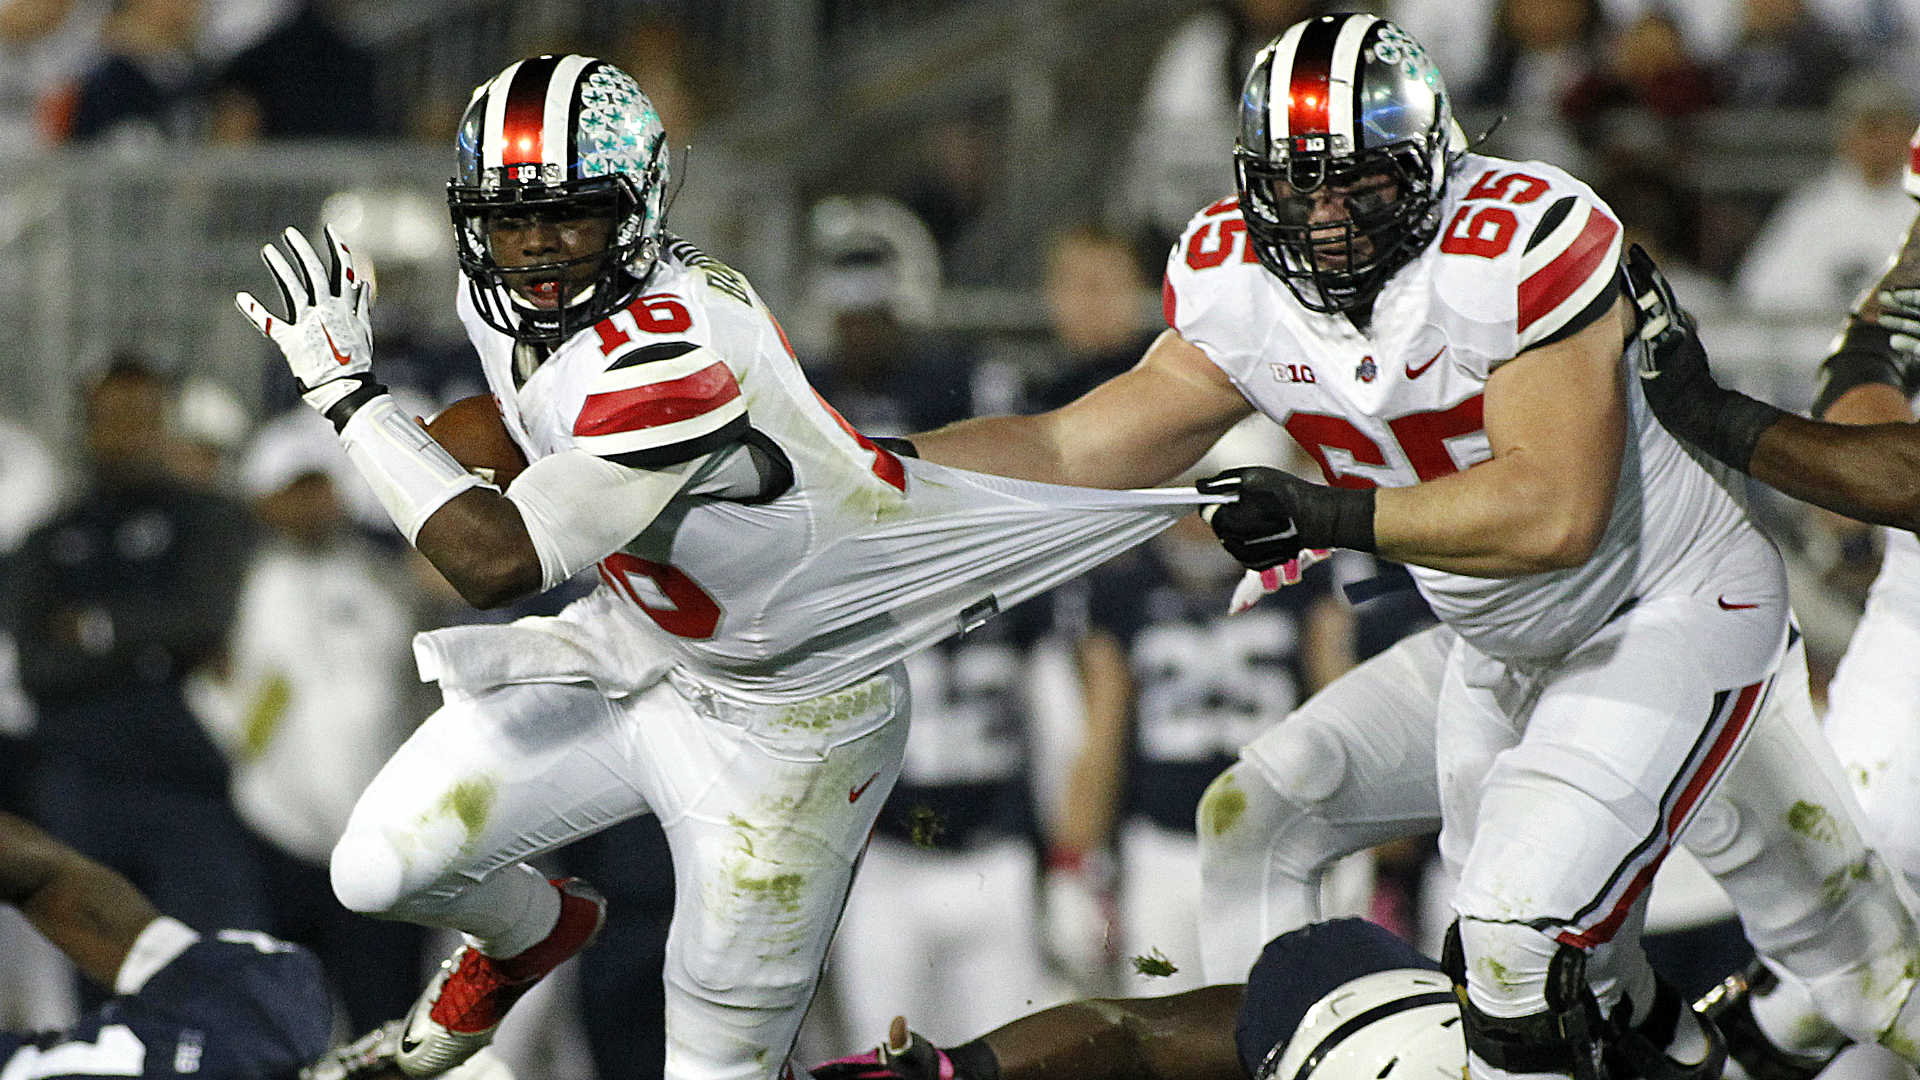 Lessons Ohio State Learned From Double OT Thriller With Penn State